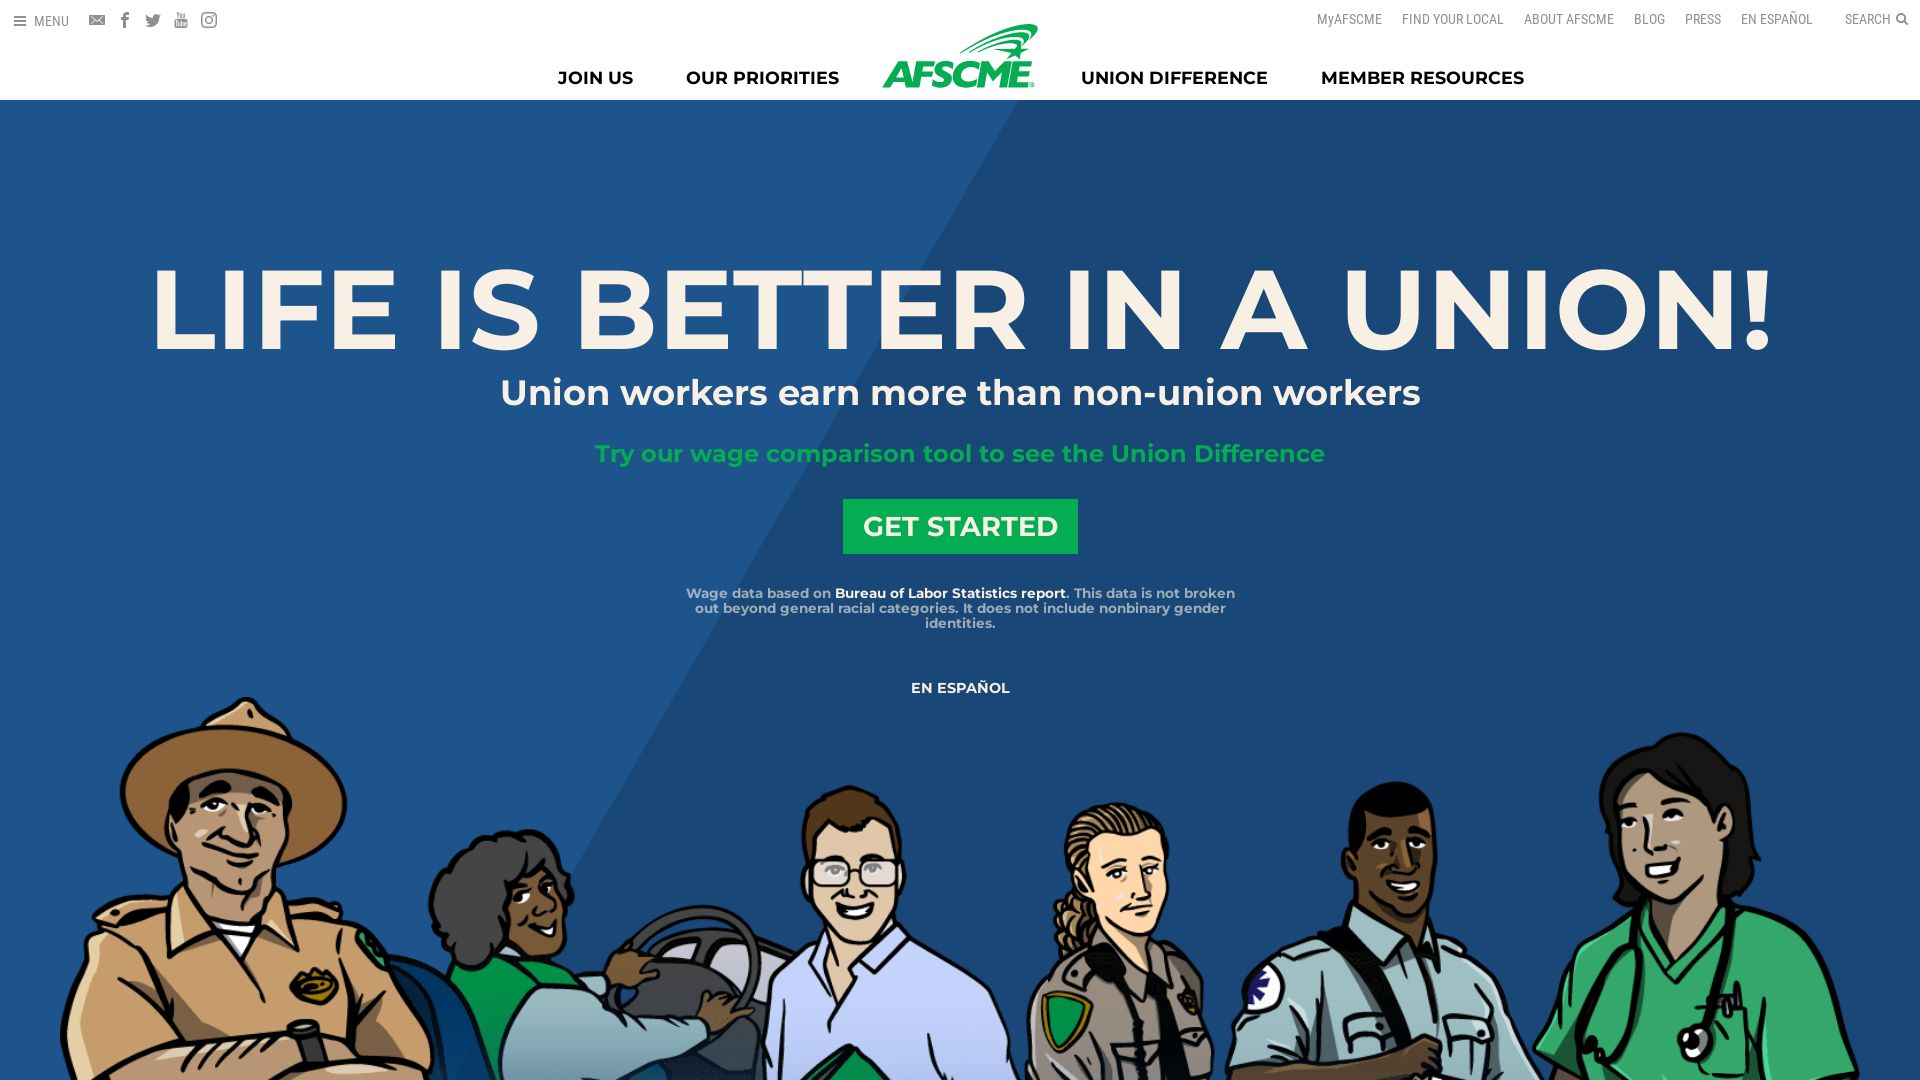 Website status union-wages.org is   ONLINE